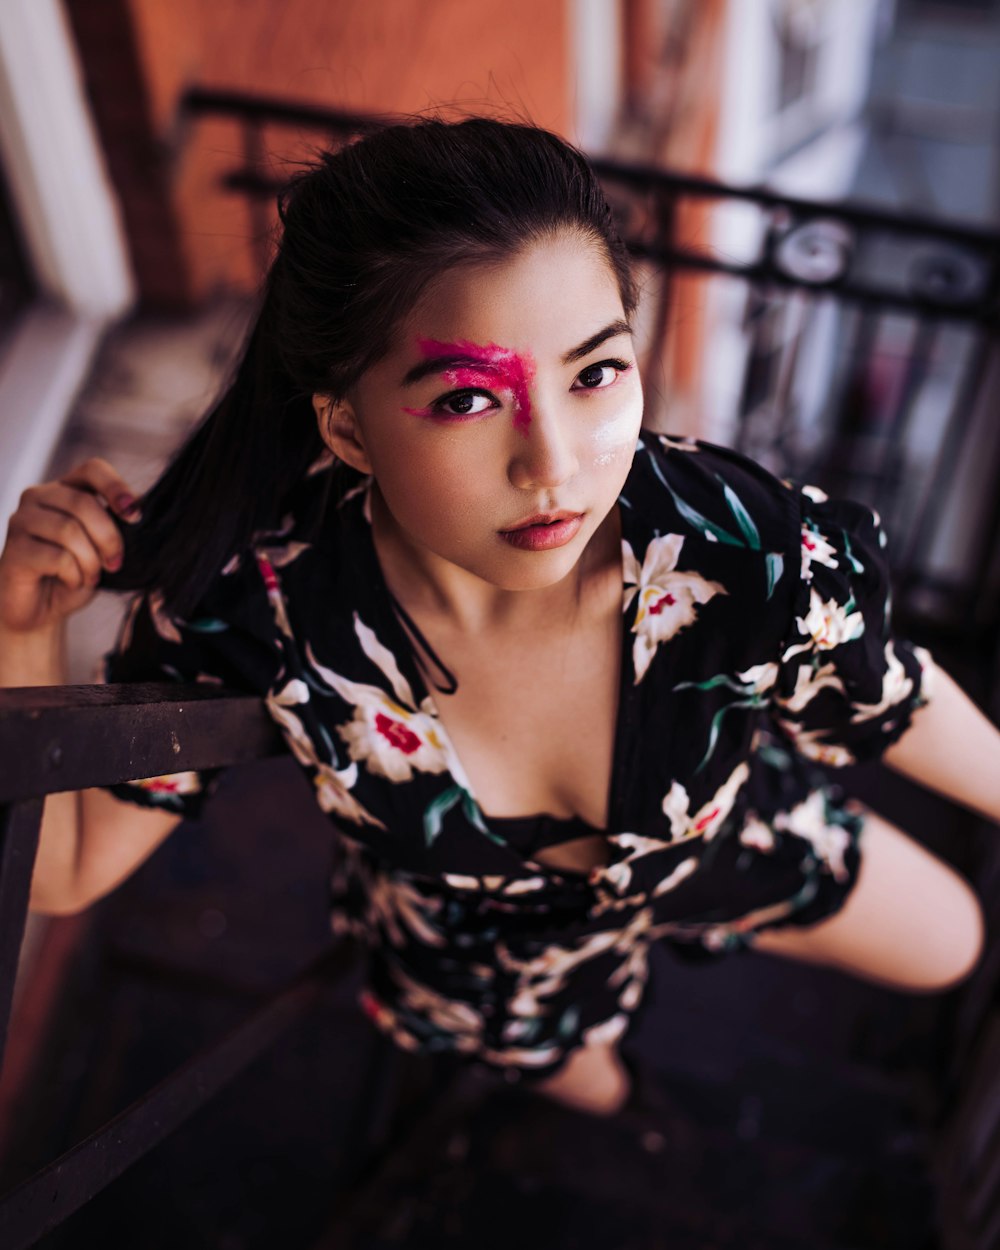 a woman with a flowered shirt and pink makeup